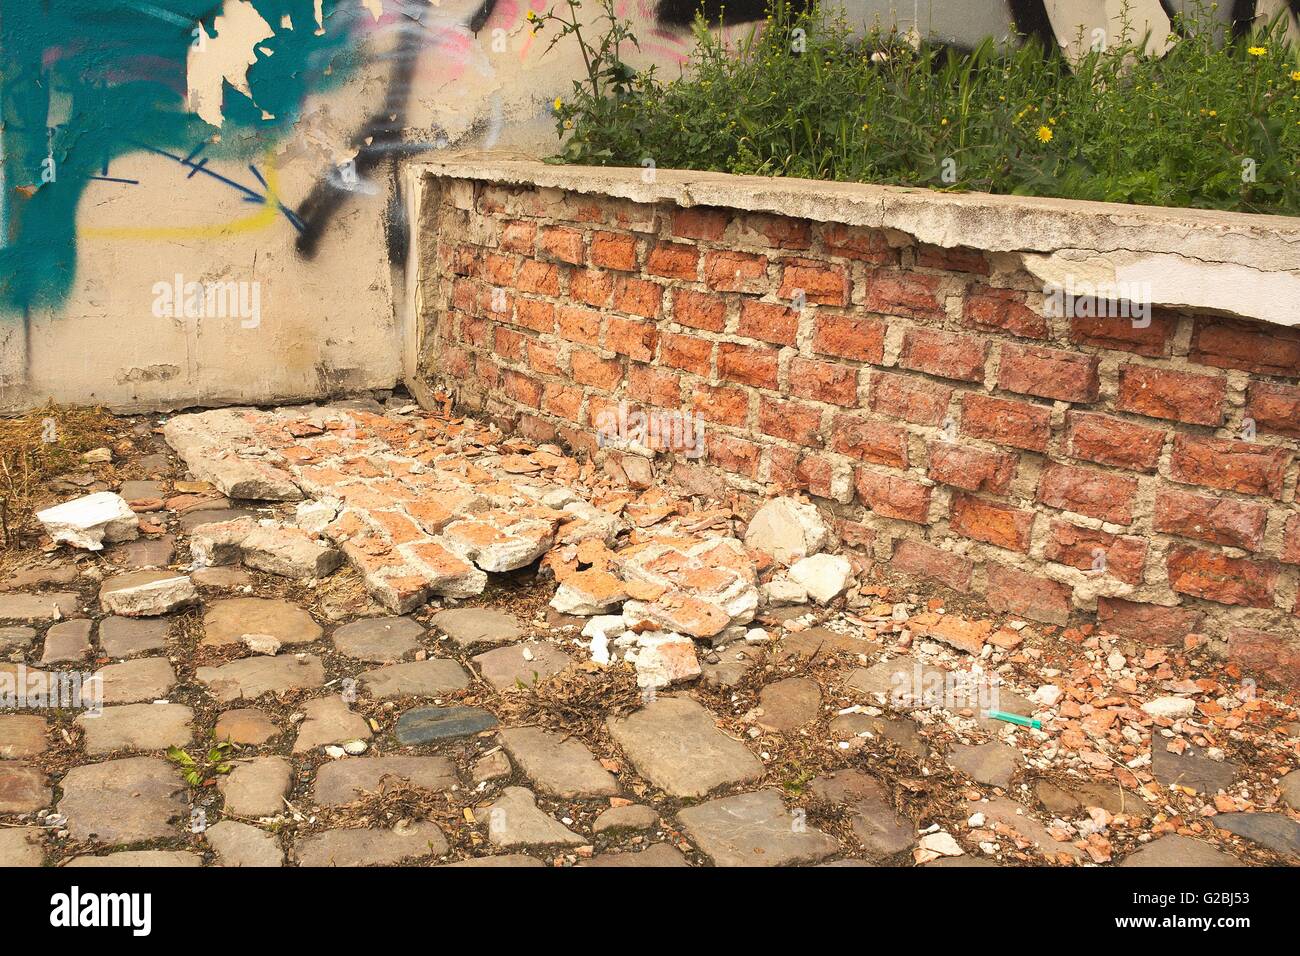 Low disintegration of the old brick wall. Brick lying on a paved street.On the wall is visible graffiti Stock Photo